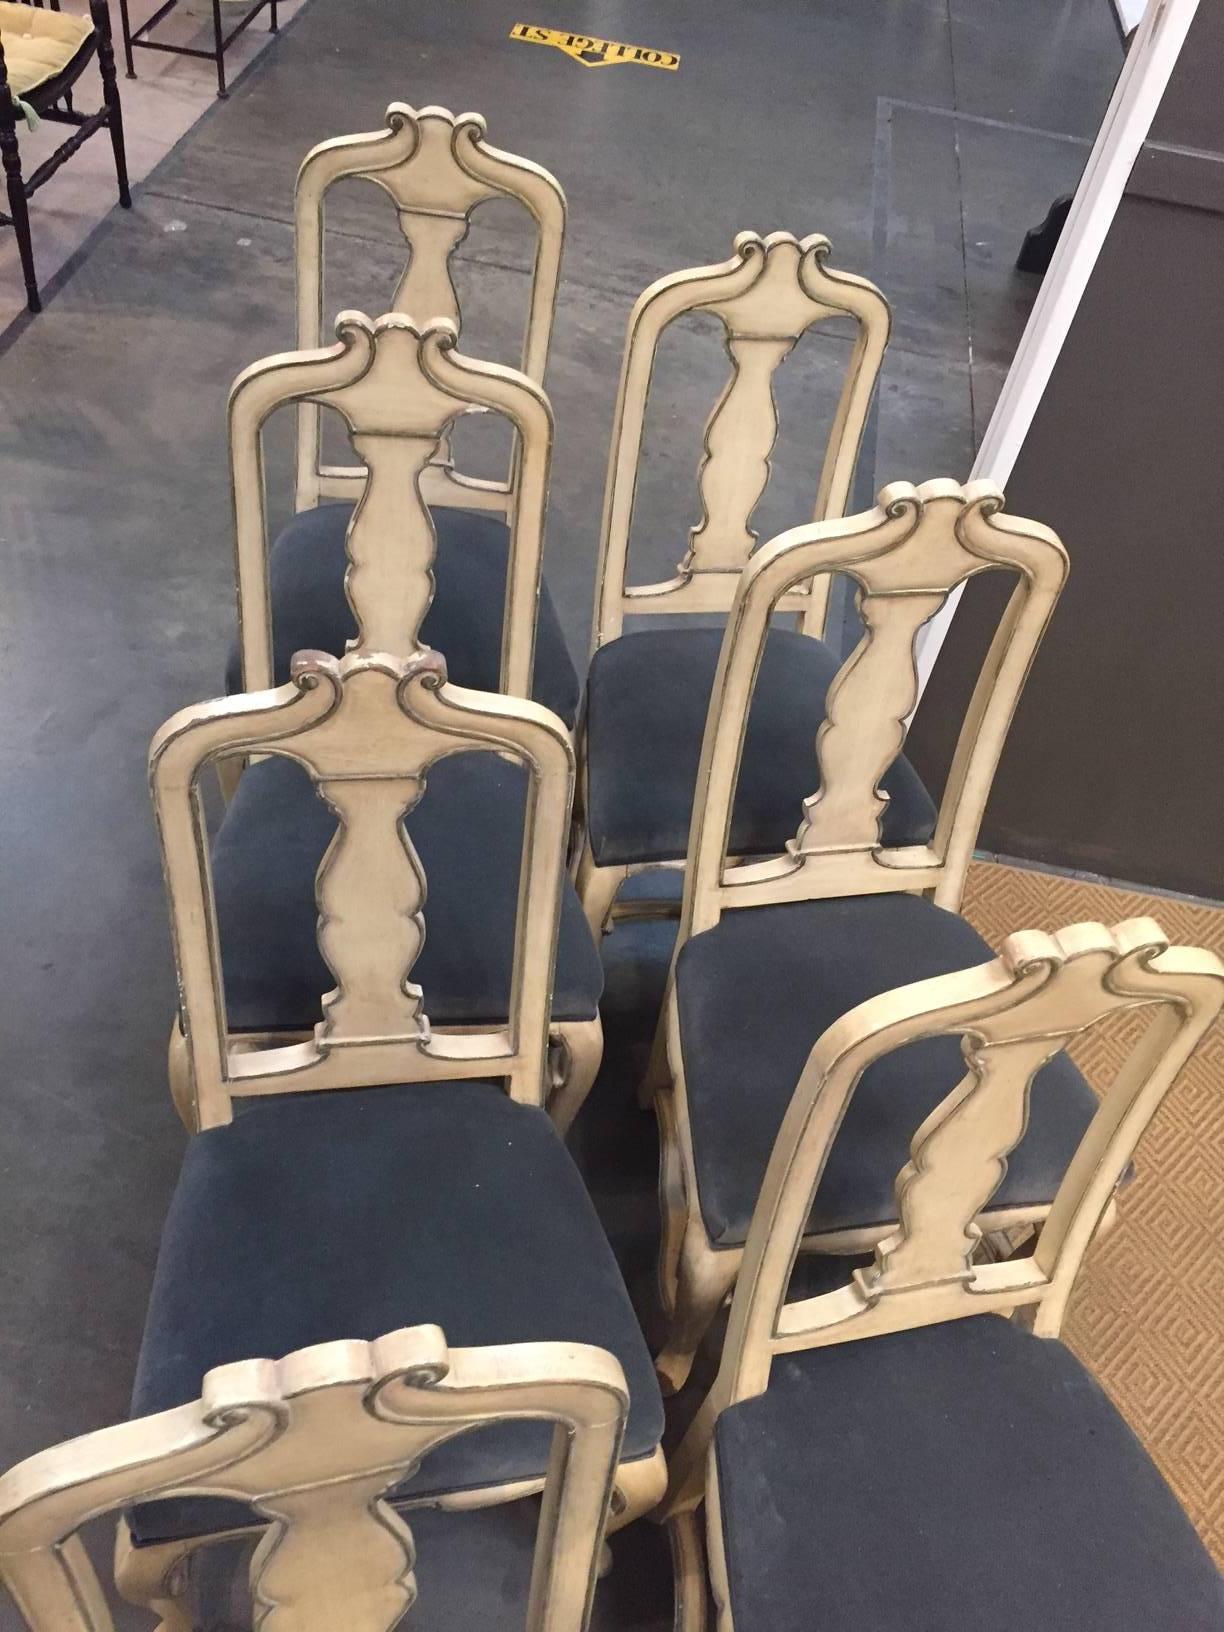 Set of painted chairs with a gray/green accent.